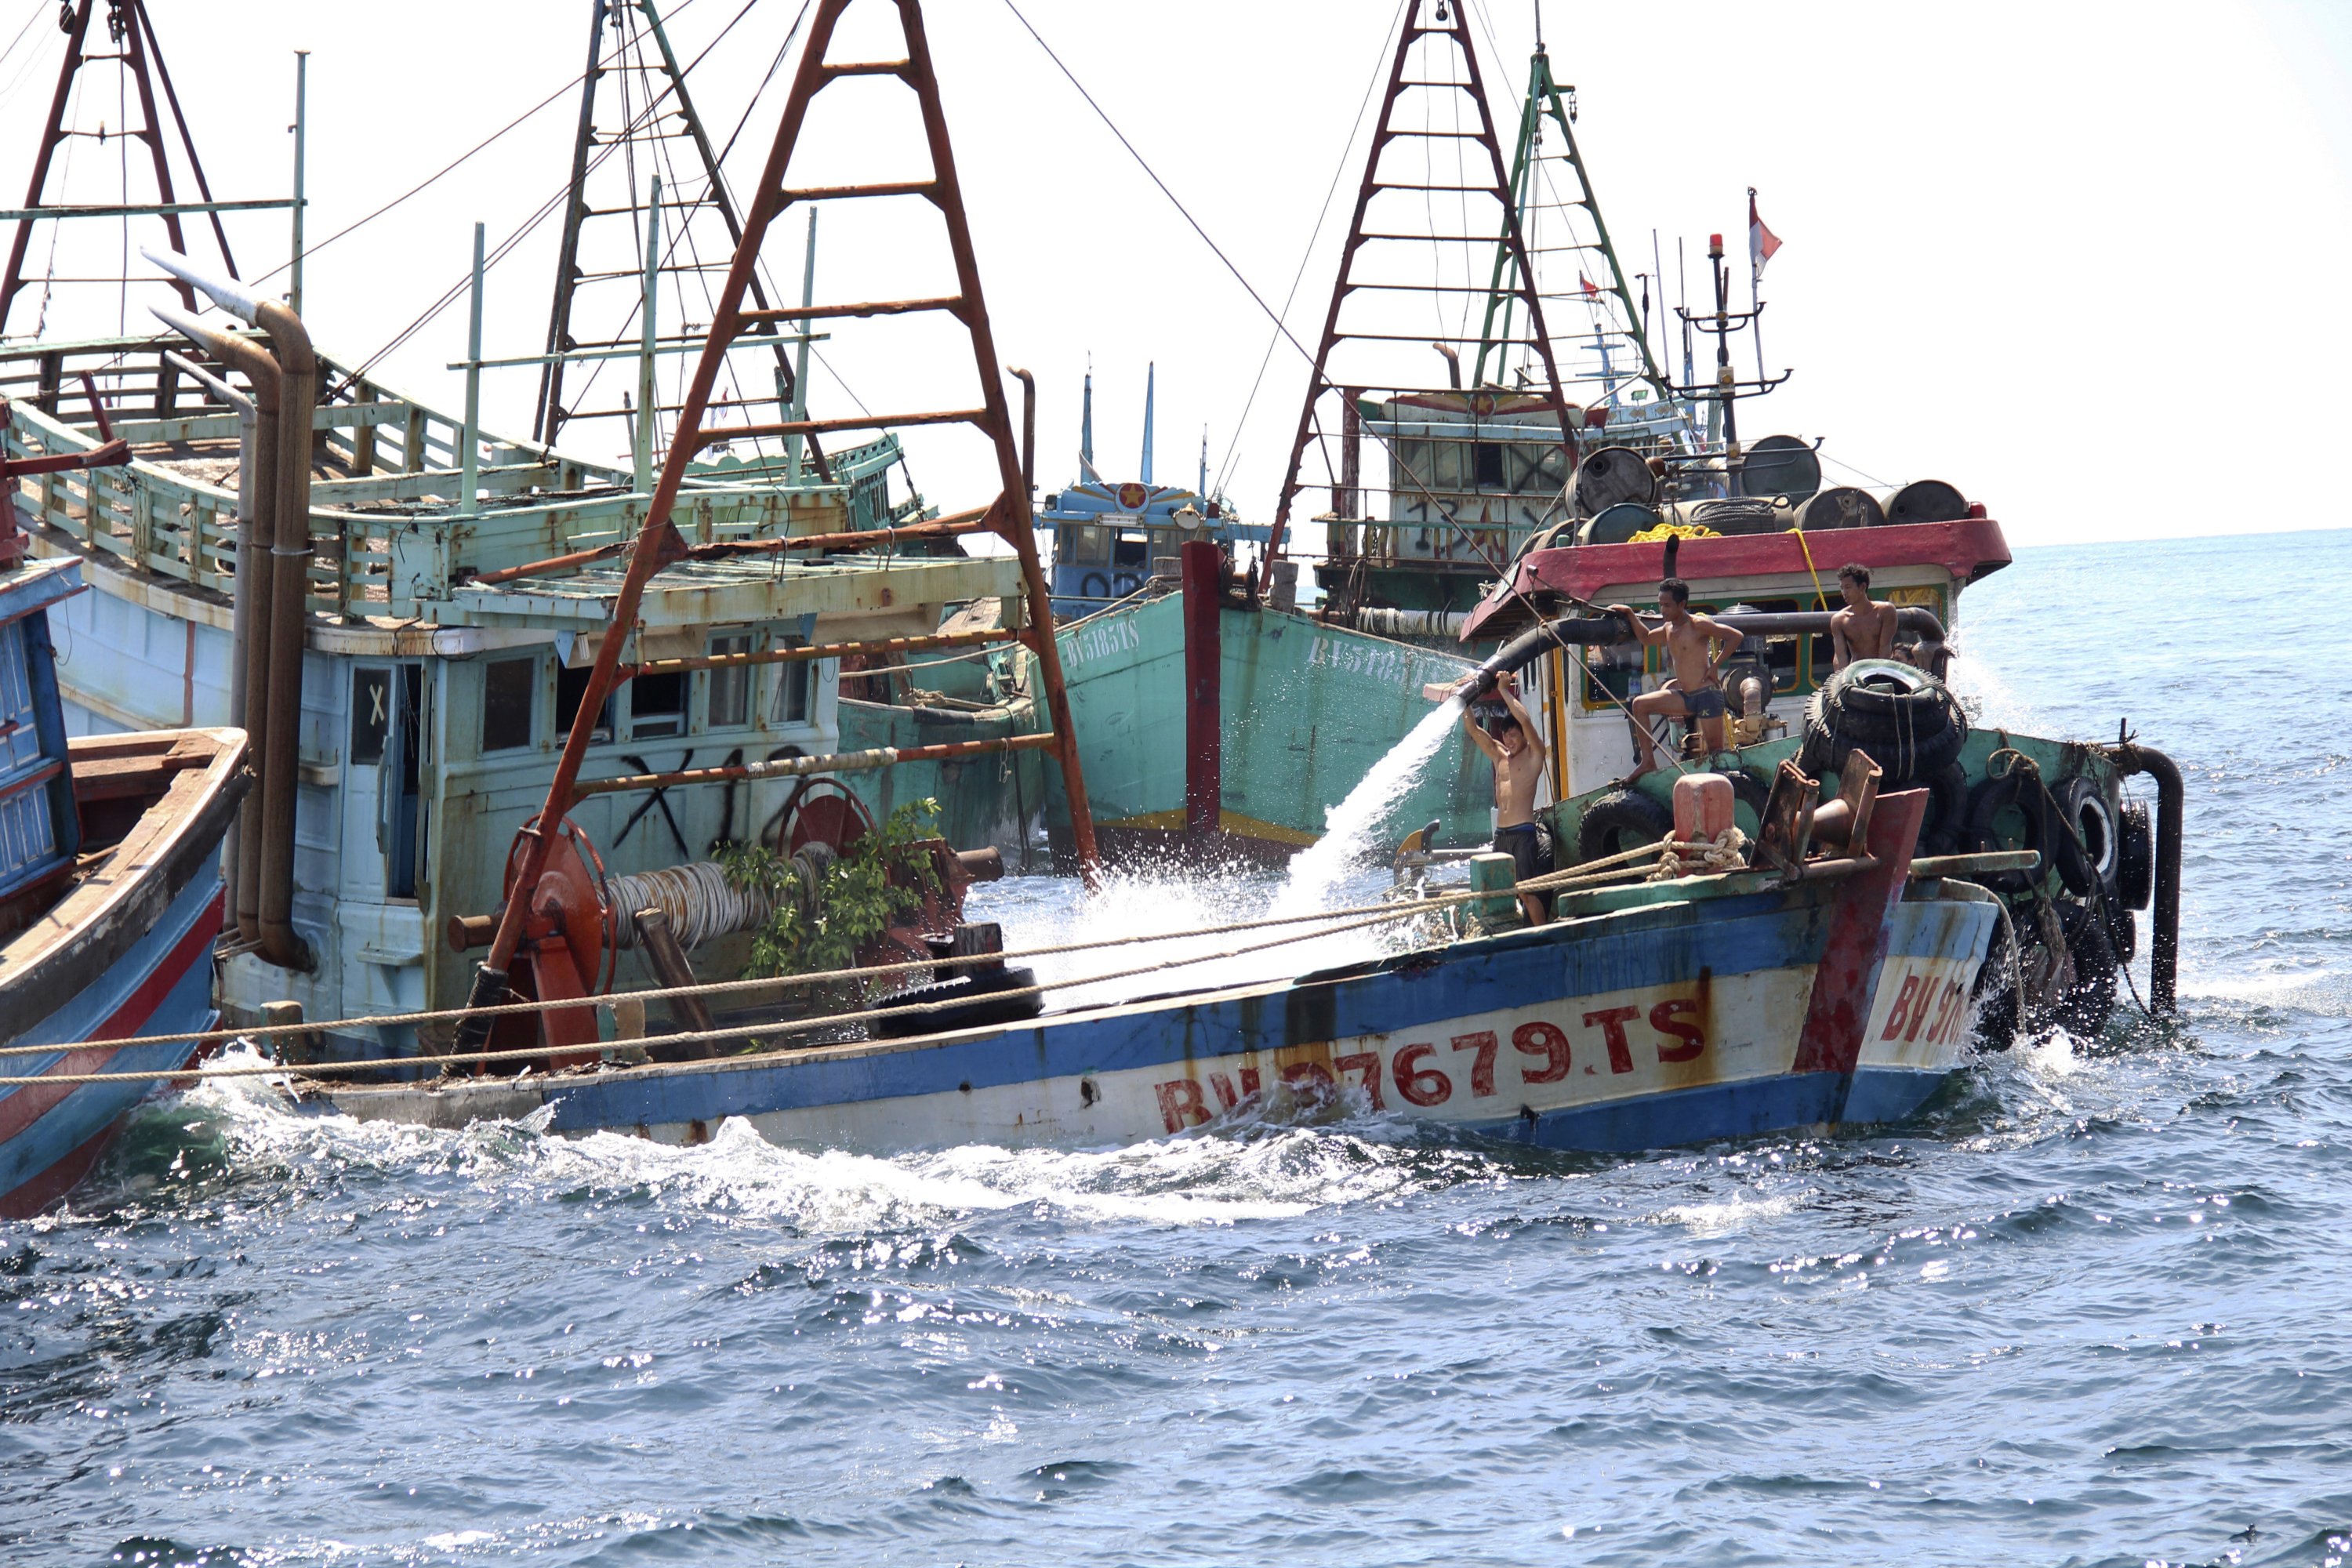 Illegal fishing in Sri Lanka waters turns into grave conflict